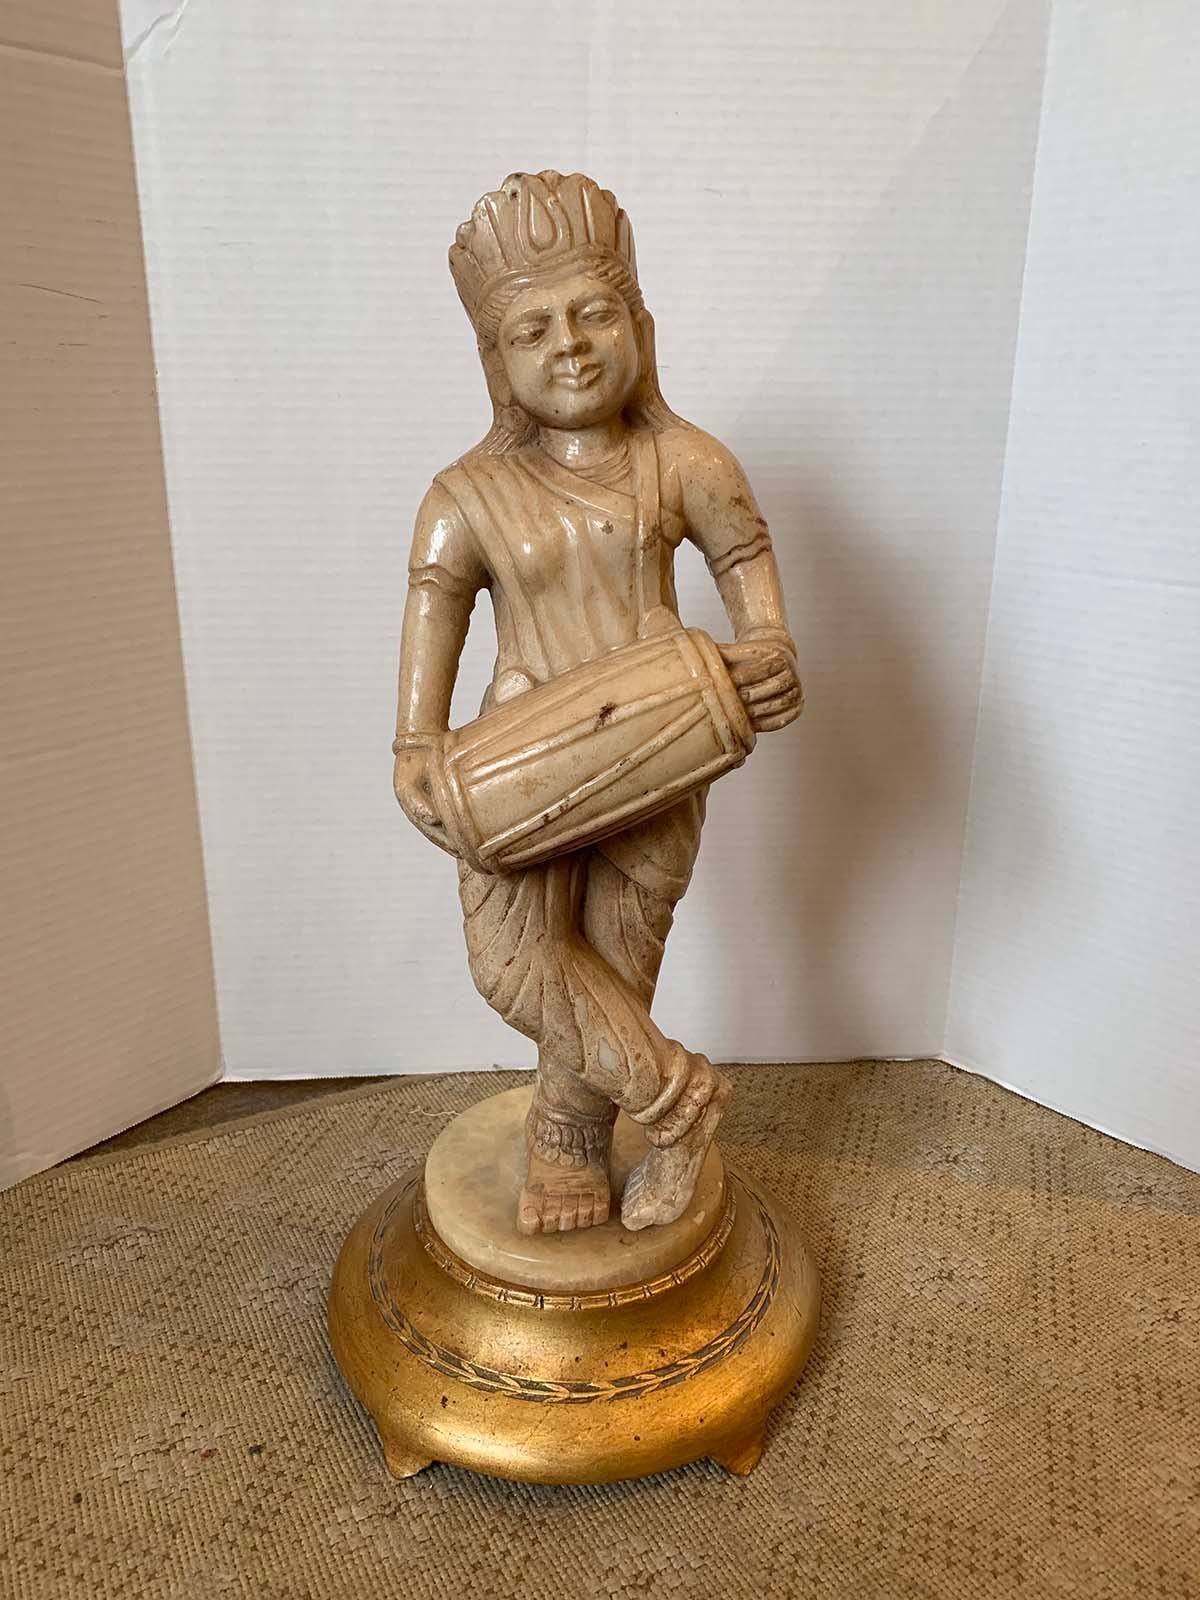 19th-20th century Eastern Indian marble figure on giltwood base.